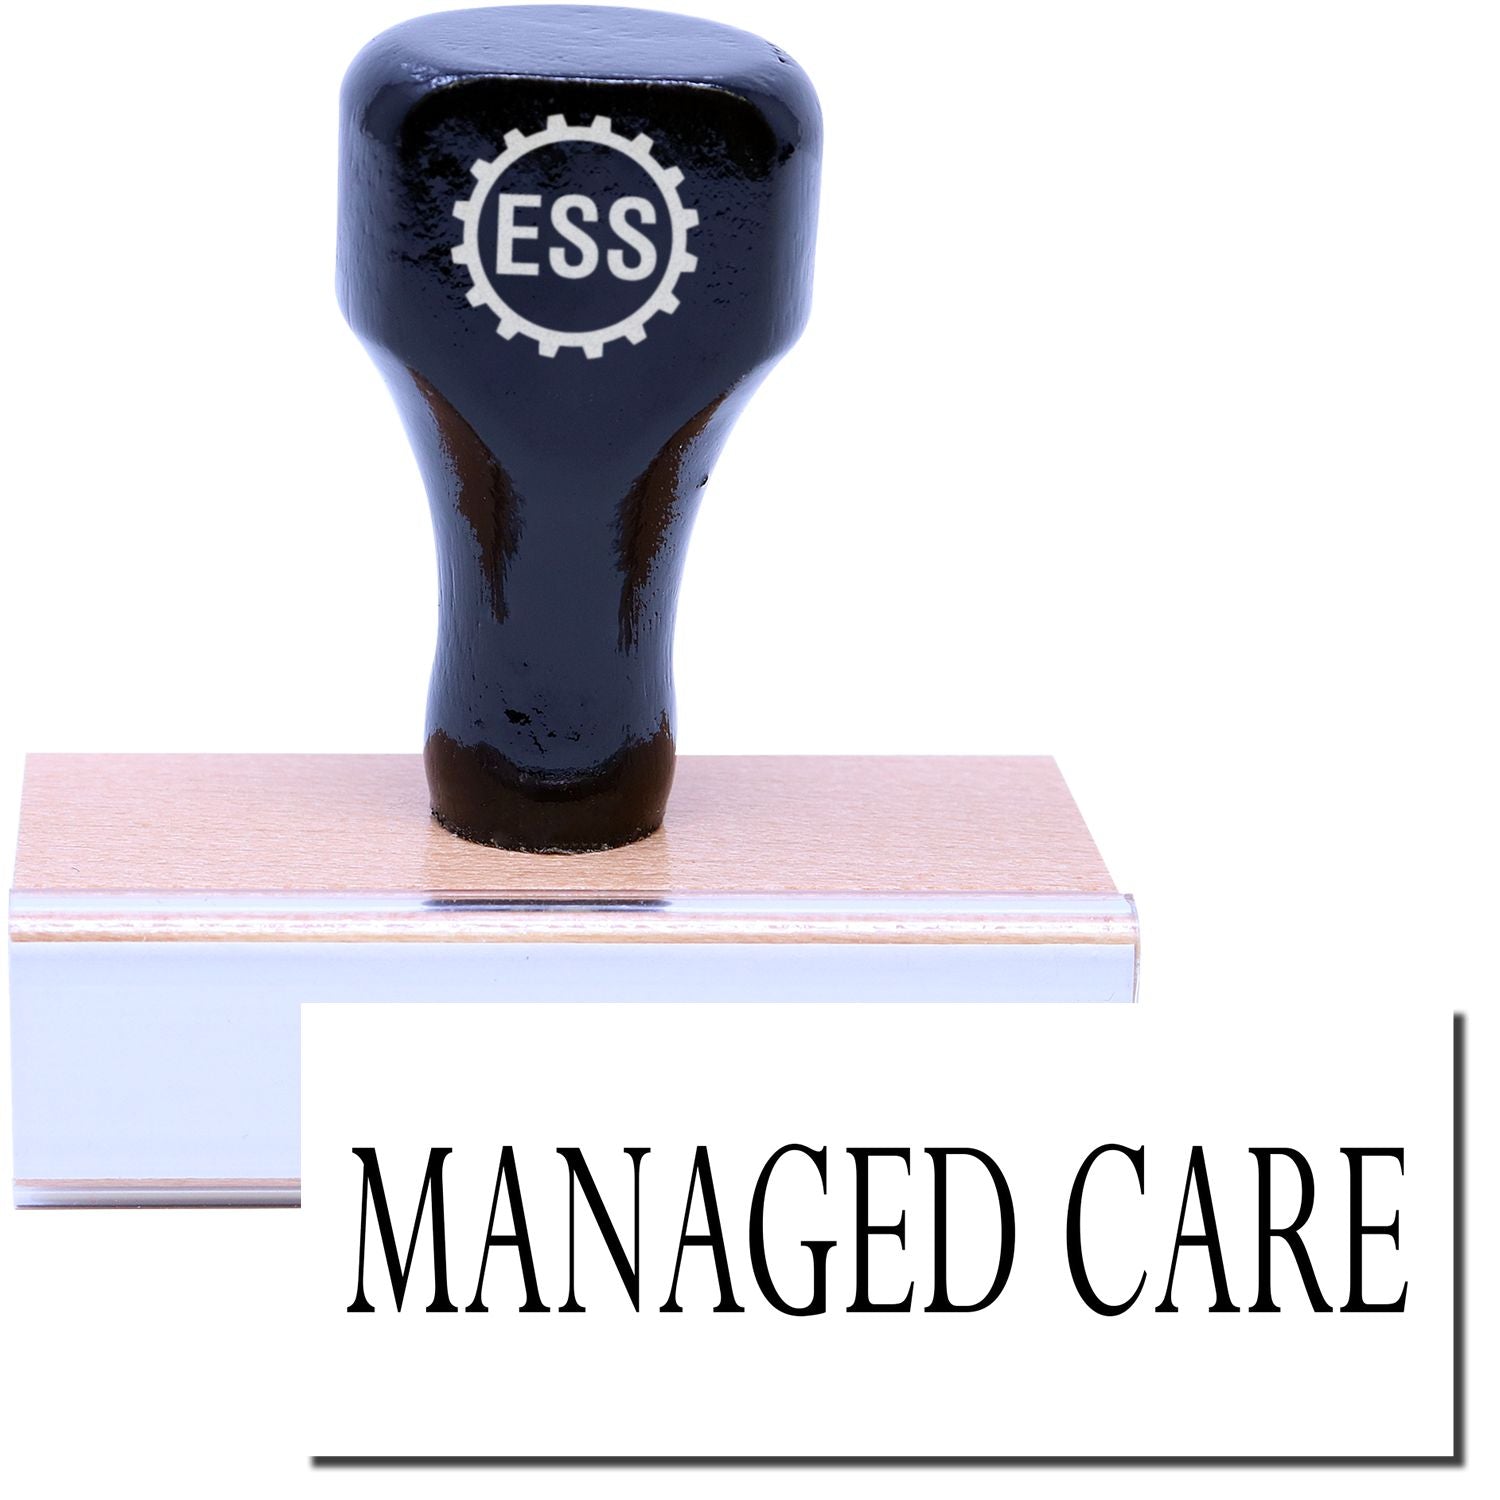 A stock office rubber stamp with a stamped image showing how the text "MANAGED CARE" in a large font is displayed after stamping.